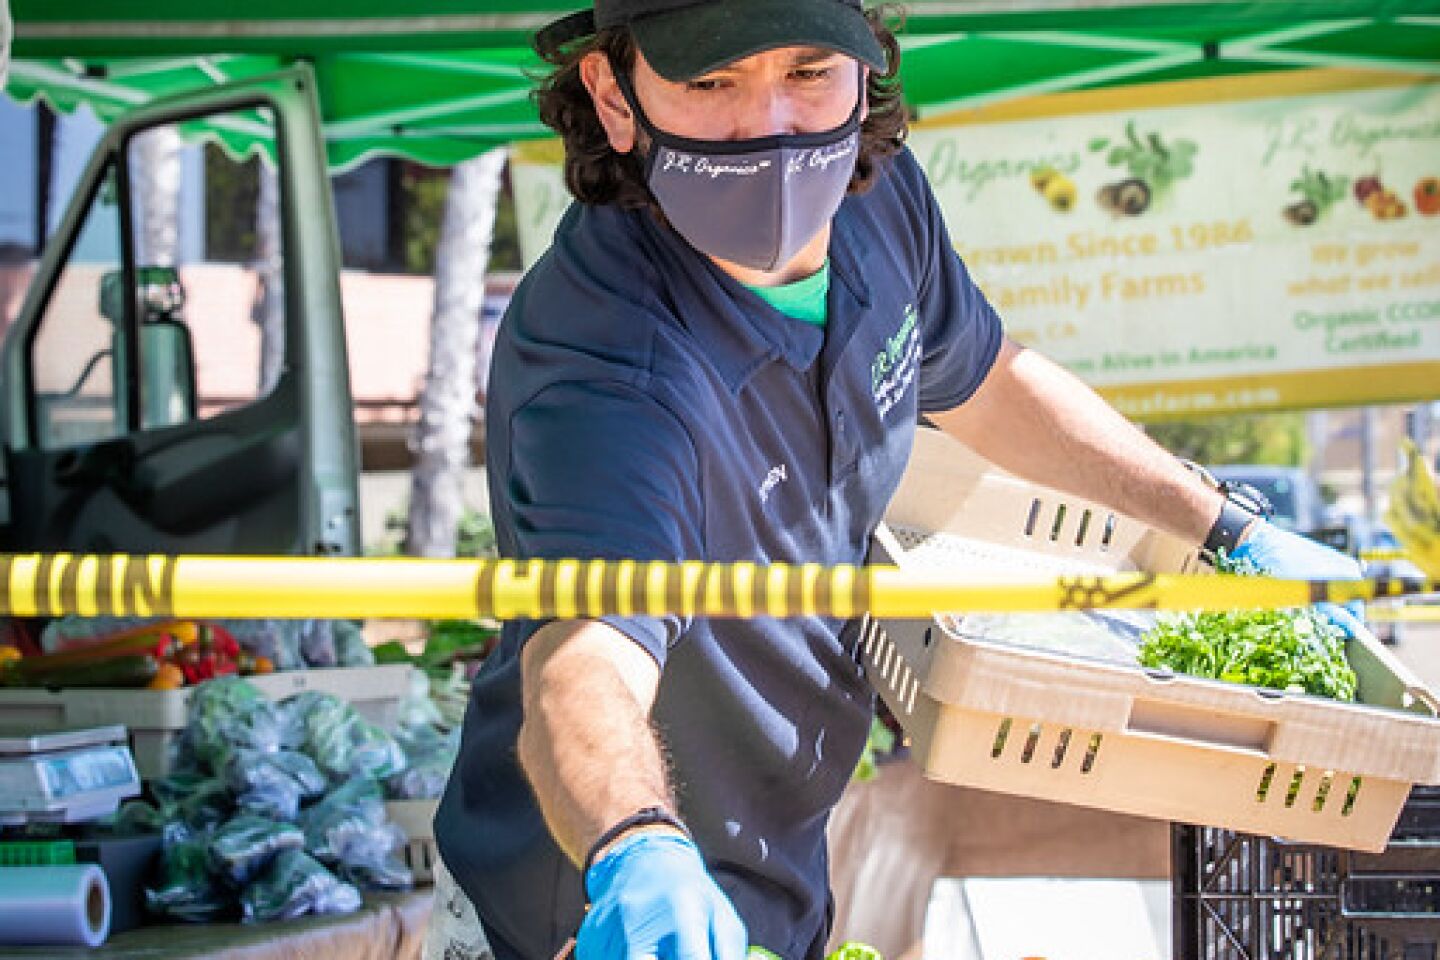 Stephen Clark works at the reopened Pacific Beach Tuesday Farmers’ Market on Bayard and Hornblend streets on May 19. The market is limited to farm and grocery products in accord with city of San Diego guidelines.